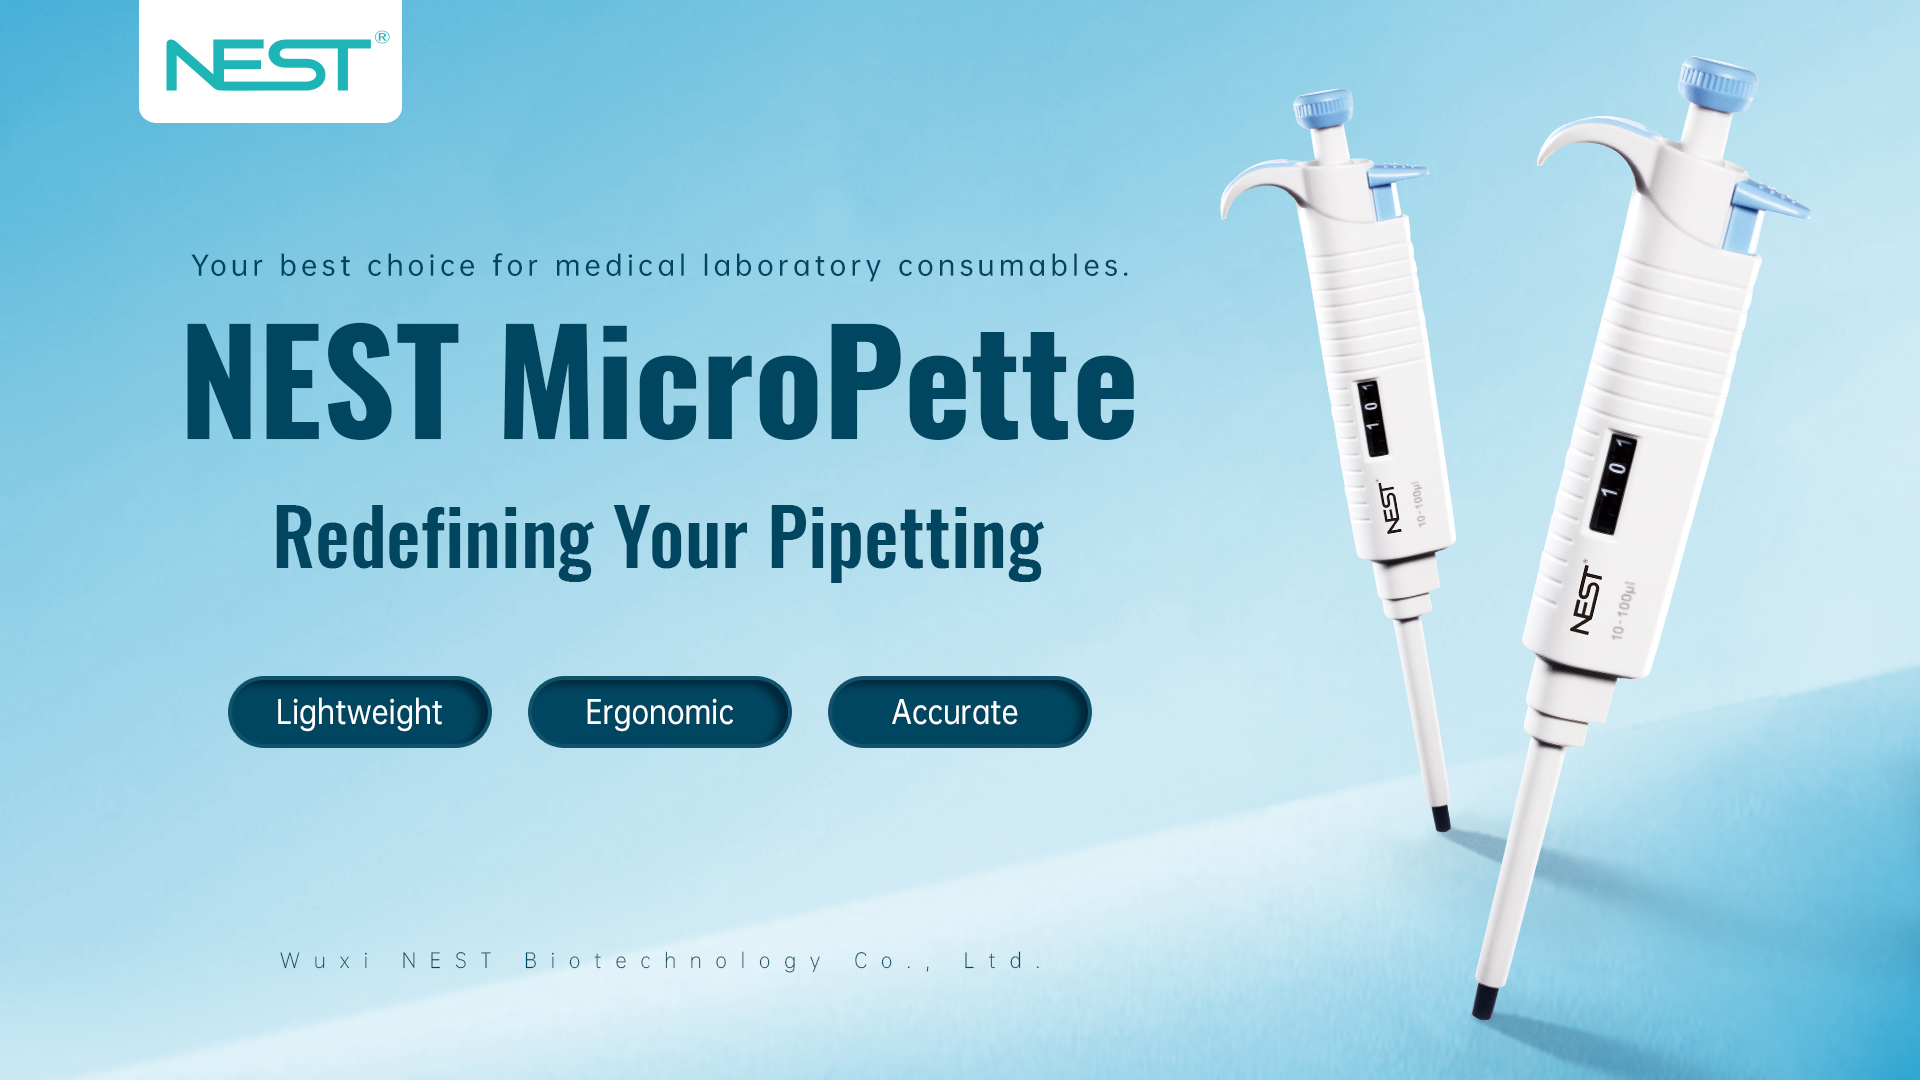 NEST MicroPette: Redefining Comfort and Accuracy in Pipetting